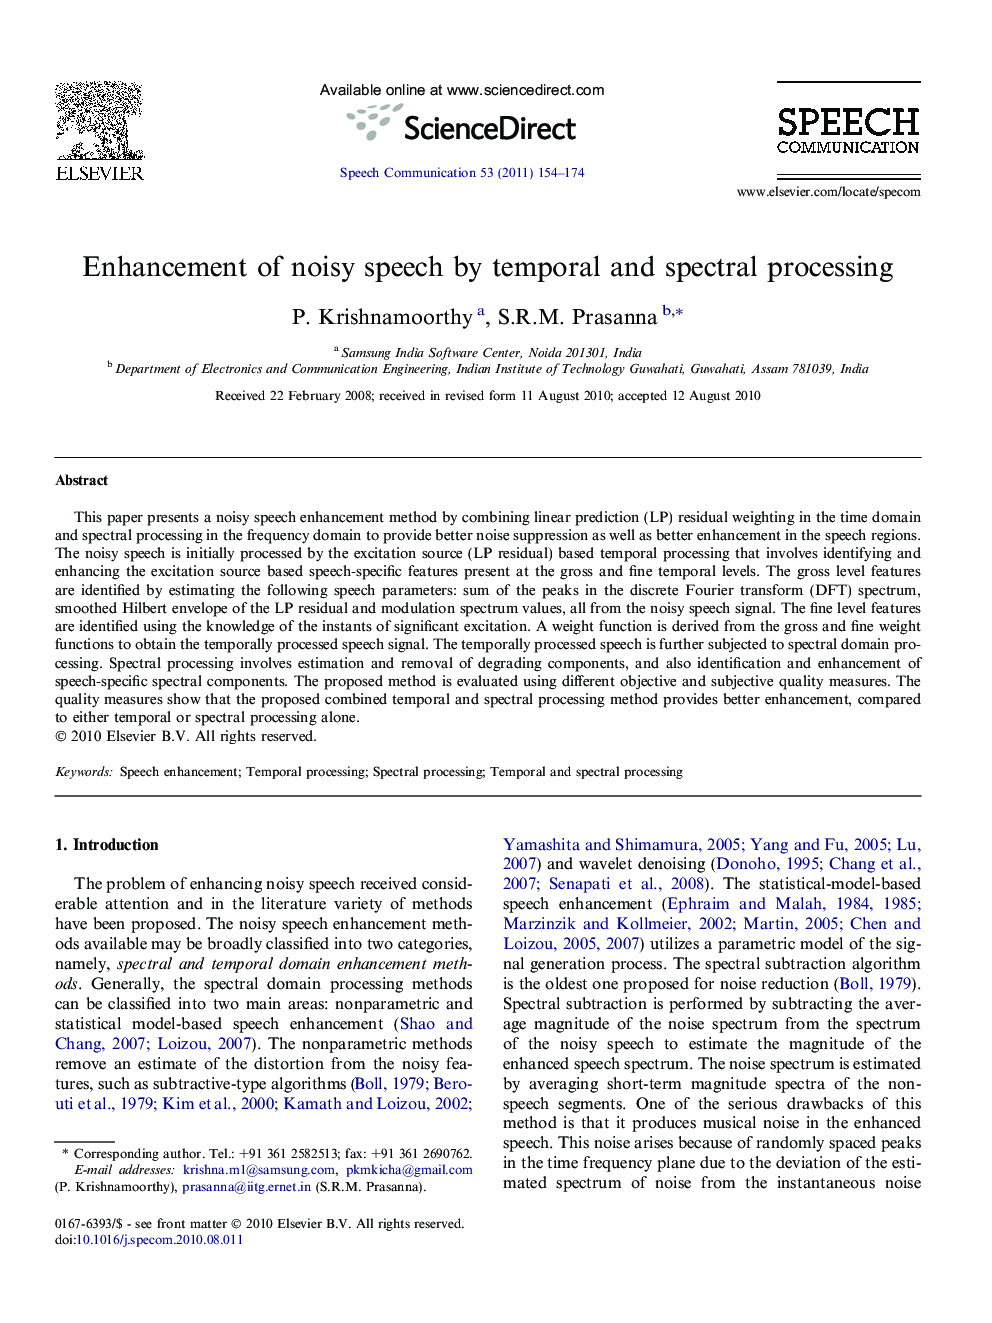 Enhancement of noisy speech by temporal and spectral processing